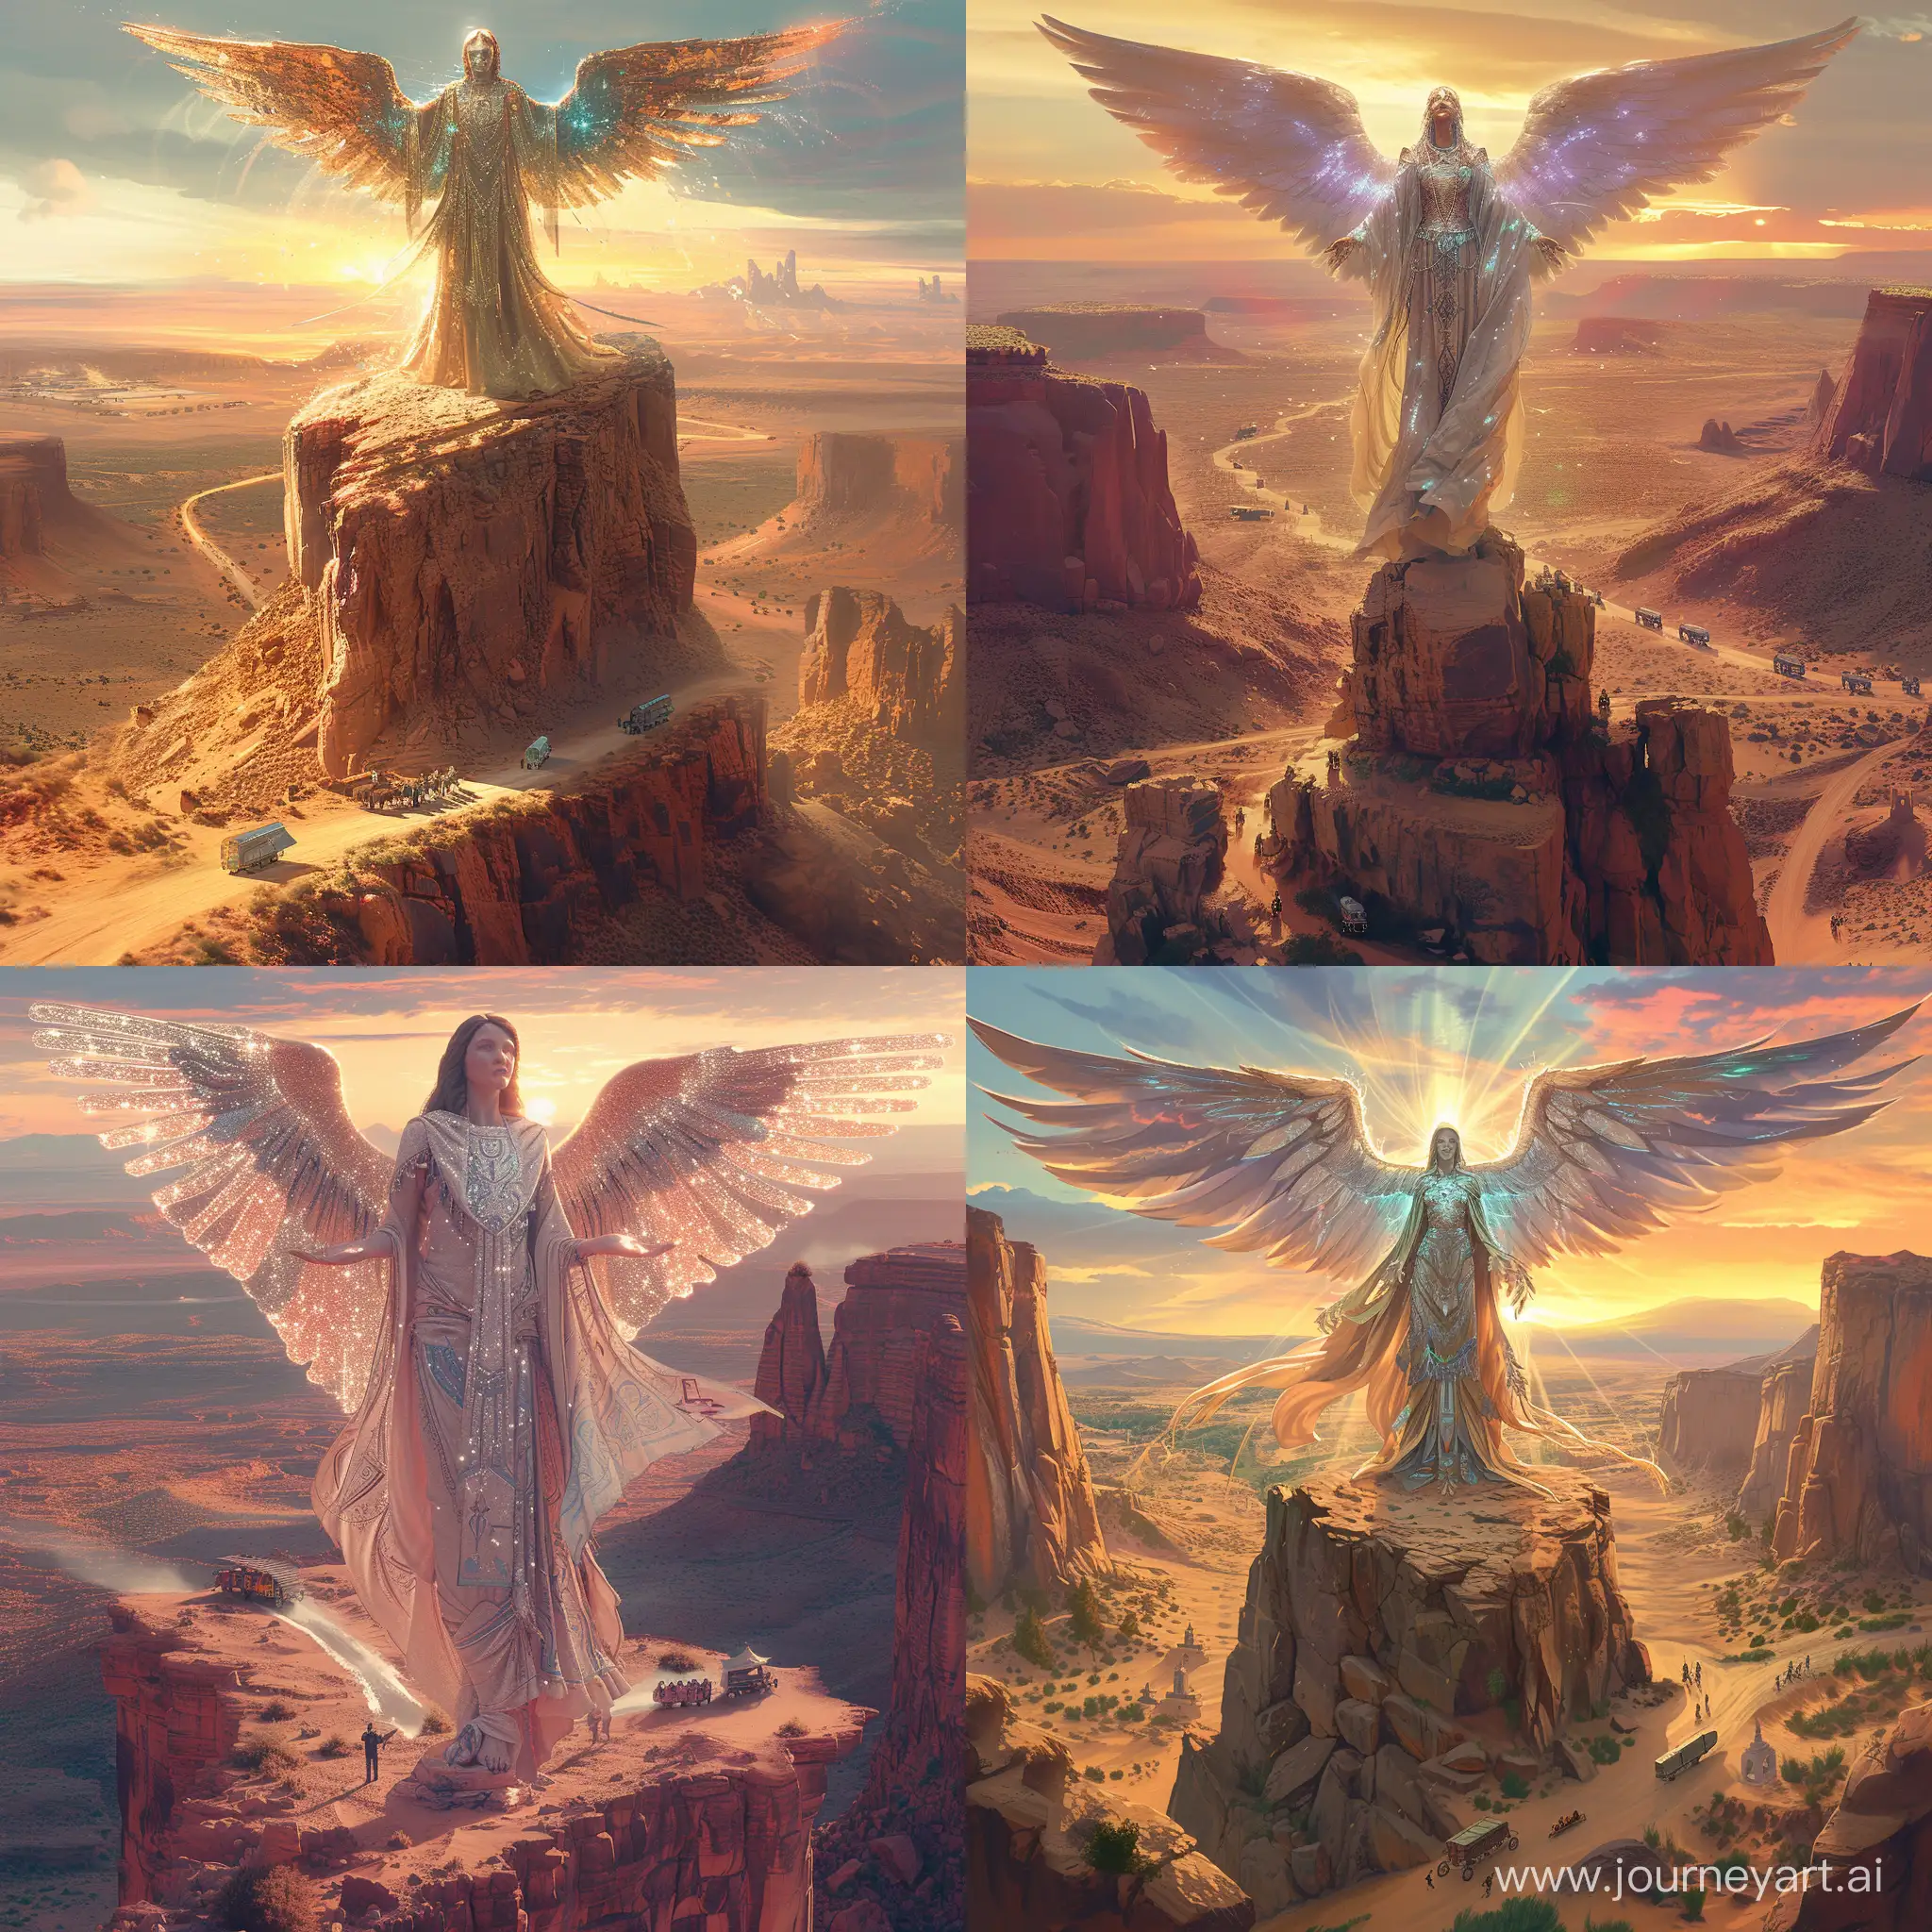 The Angel of Montano is depicted in a surrealistic style, standing atop a rocky outcrop overlooking a vast desert landscape. The angel's wings span wide, shimmering with ethereal light, as they gaze into the distance with a serene expression. Their flowing robes billow in the desert breeze, adorned with intricate patterns and symbols. Below, a caravan of travelers makes its way across the desert, guided by the angel's watchful presence. The environment is otherworldly and mystical, with surreal rock formations and a colorful sunset casting a warm glow over the scene. The art style is inspired by surrealism and fantasy, with dreamy textures and vibrant colors. The camera shot is a wide-angle view, capturing the vastness of the desert and the angel's majestic presence. Rendered with surreal textures and vibrant colors to create a sense of unreality and wonder.